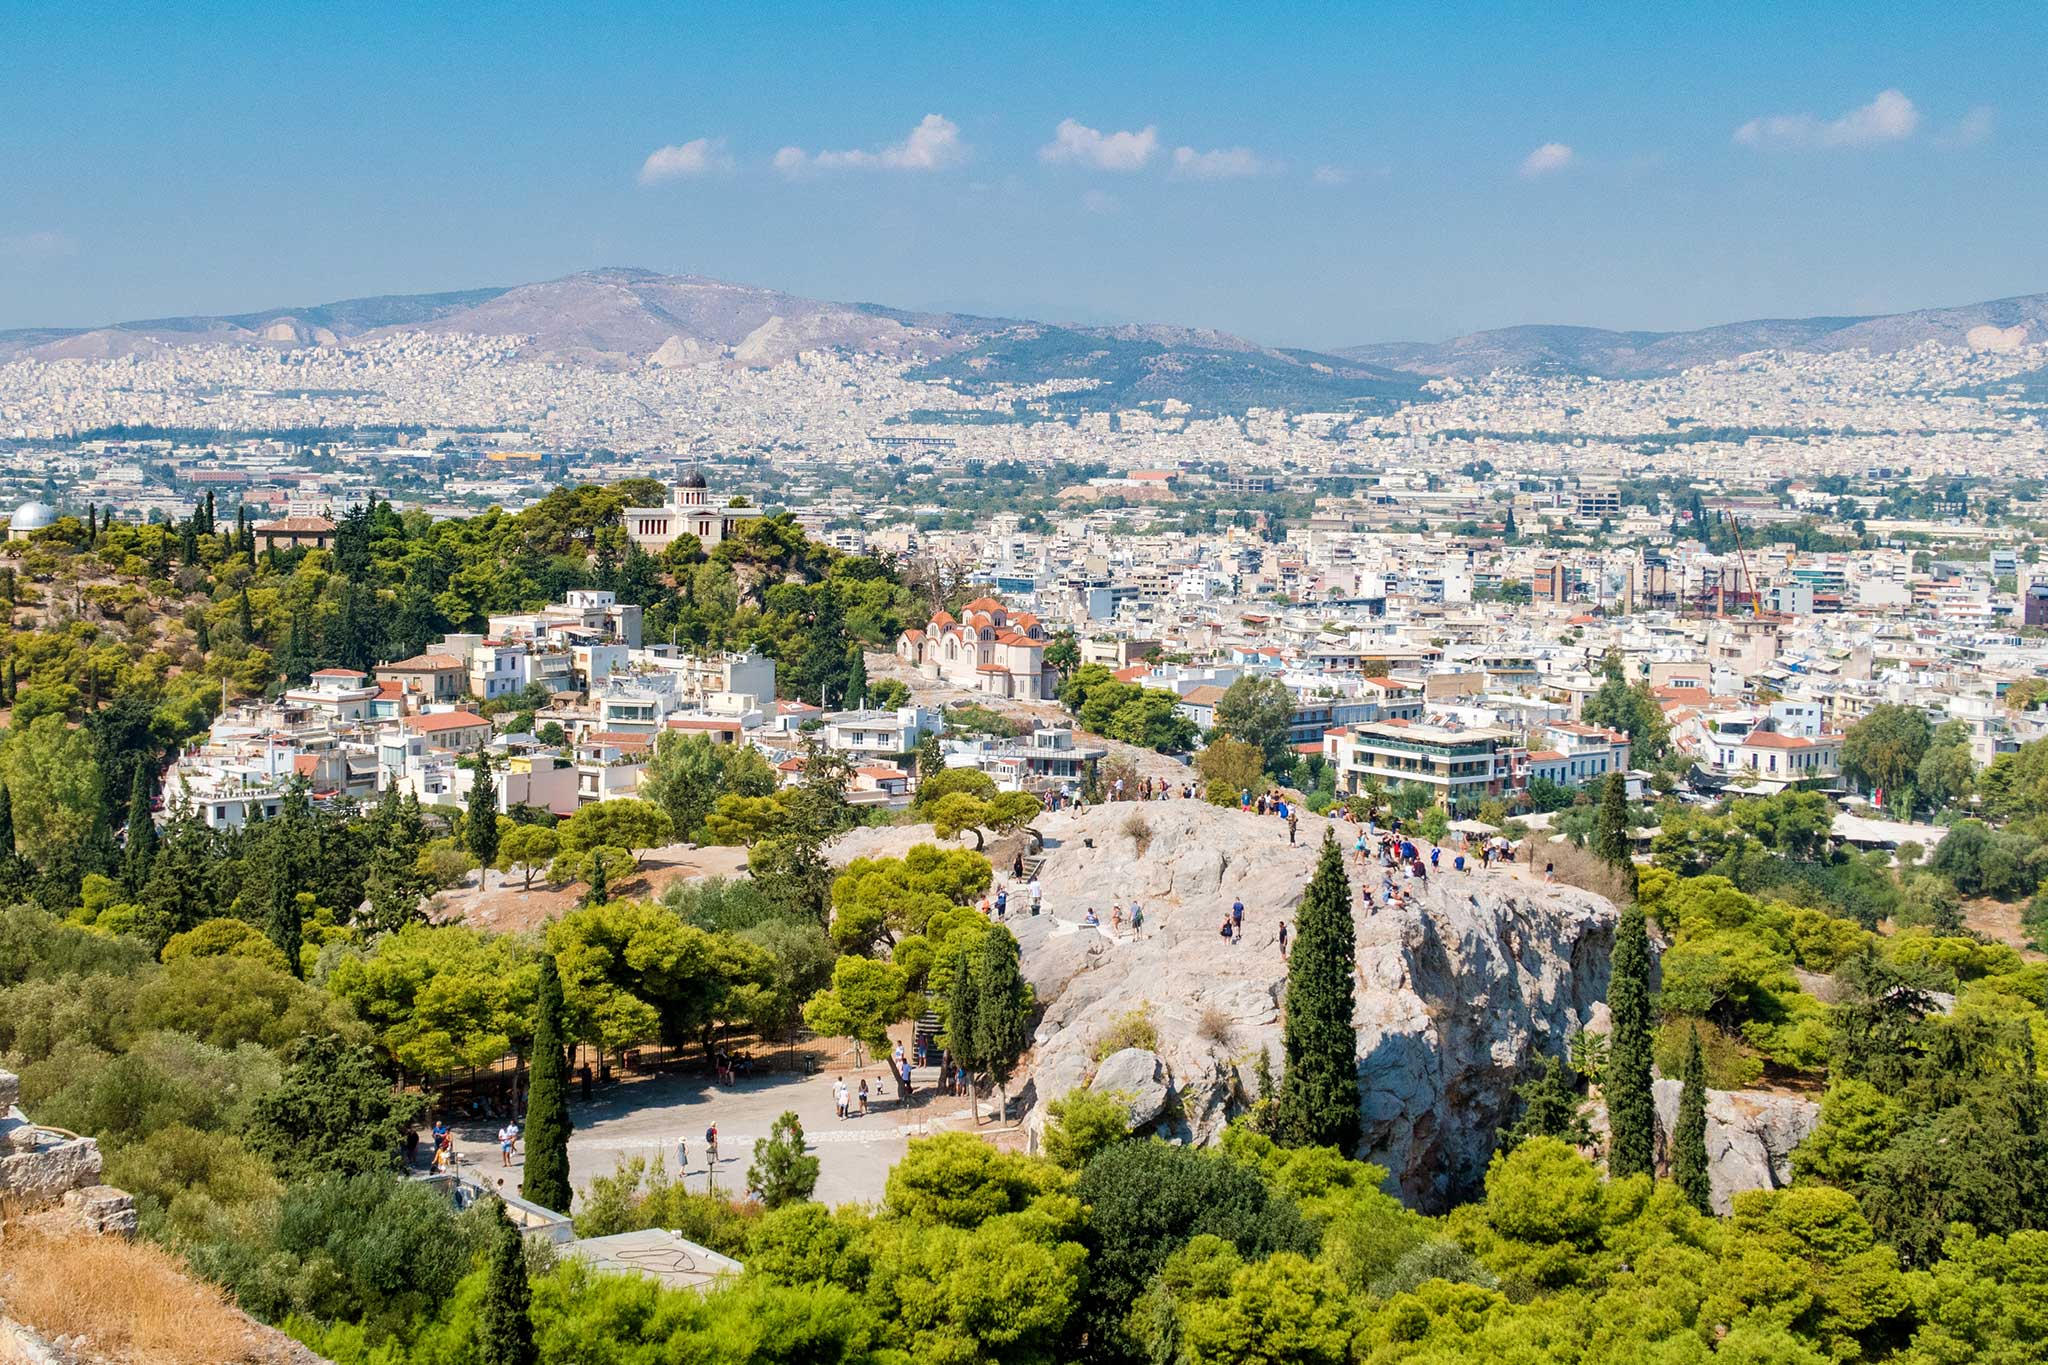 Panoramic view of Athens with dense white buildings, greenery, and mountains in the background, seen from the rocky Mars Hill.